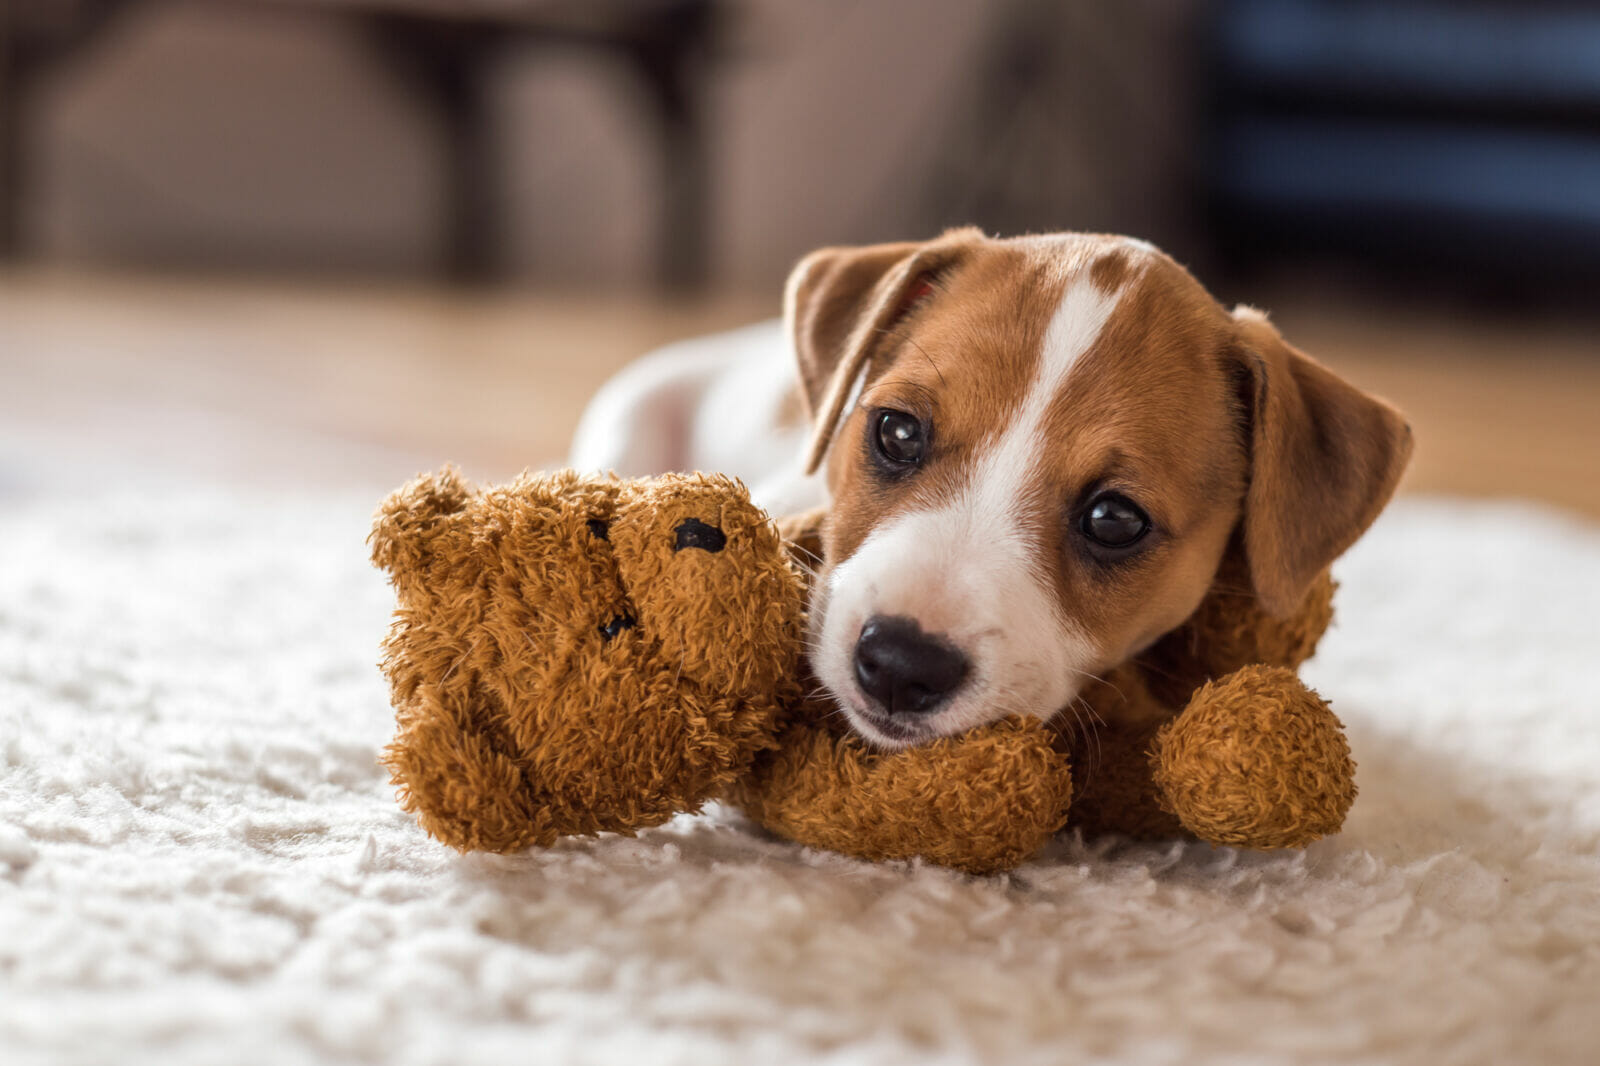 FACTORS TO CONSIDER BEFORE BUYING TOYS FOR PETS